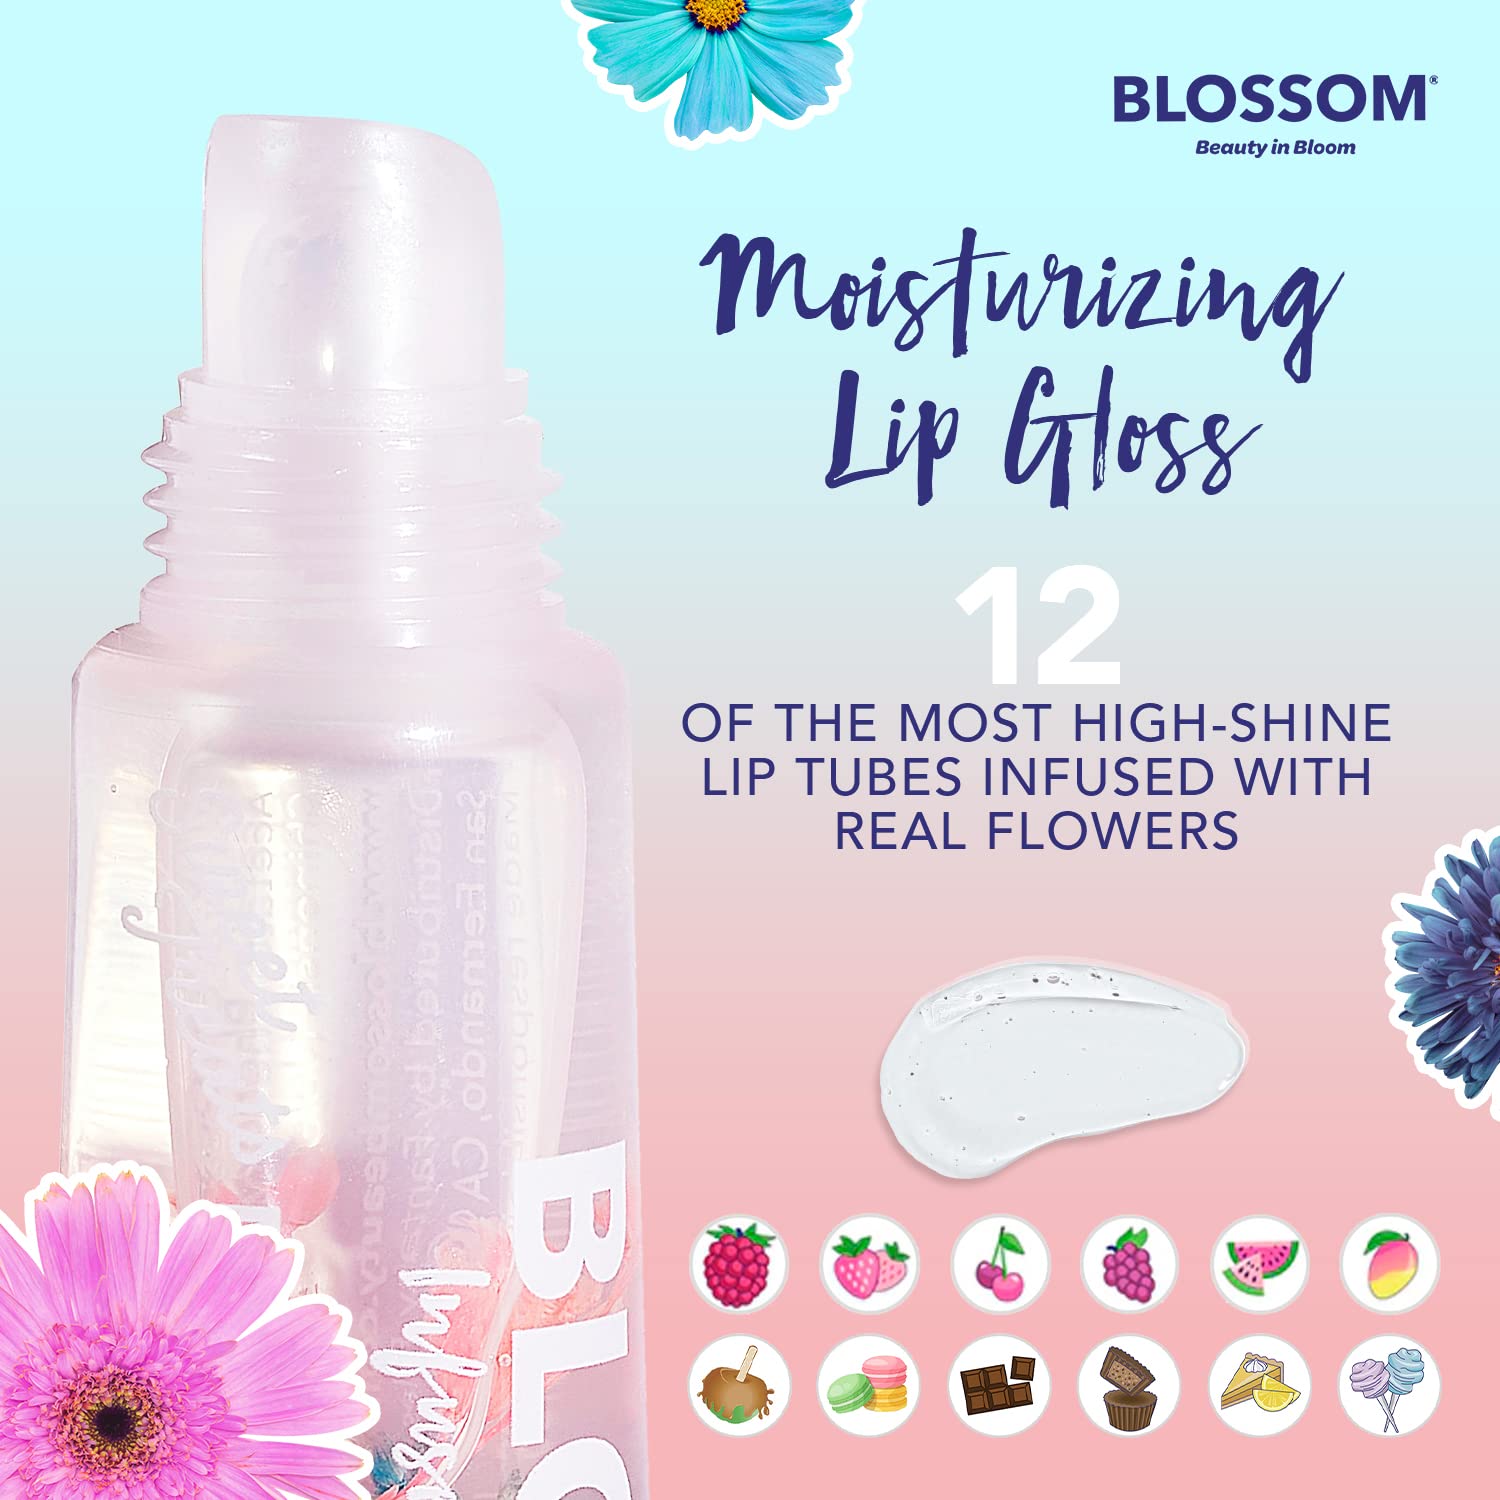 Blossom Scented Moisturizing Lip Gloss Tubes, Infused with Real Flowers, 0.9 fl. oz/27ml, 3 pack Gift Set, Strawberry/Raspberry/Mango